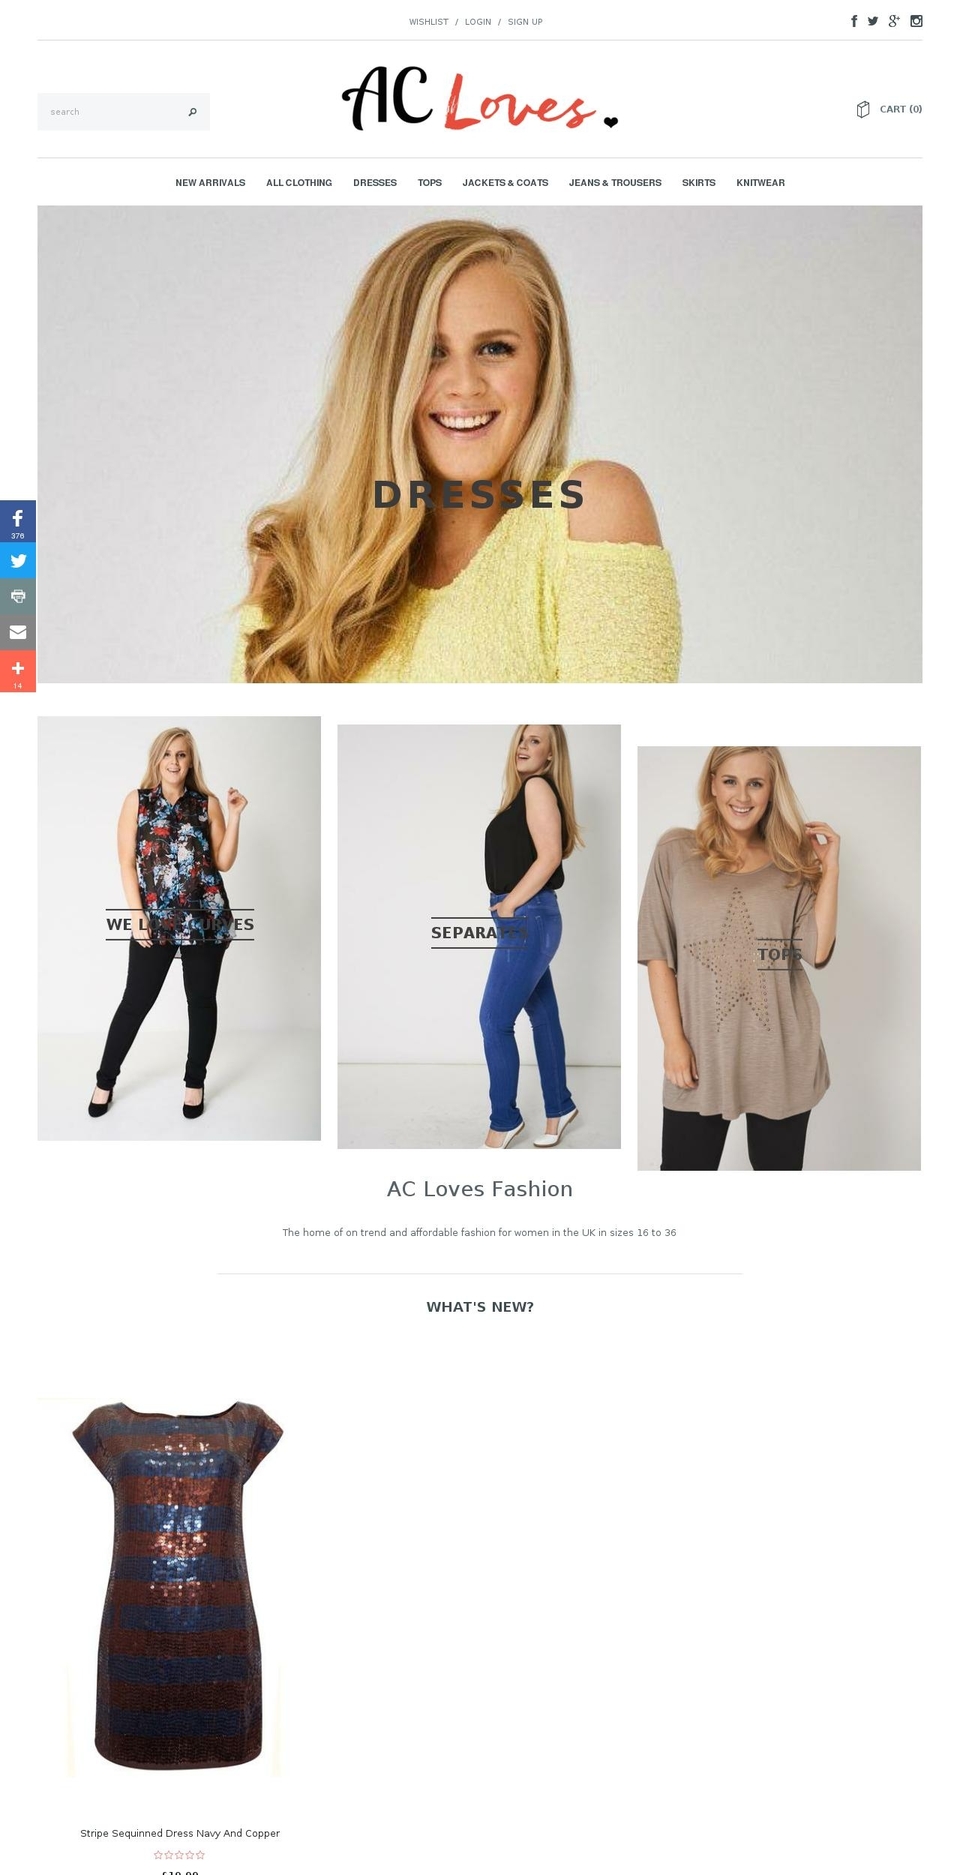 Avenue Shopify theme site example acloves.co.uk